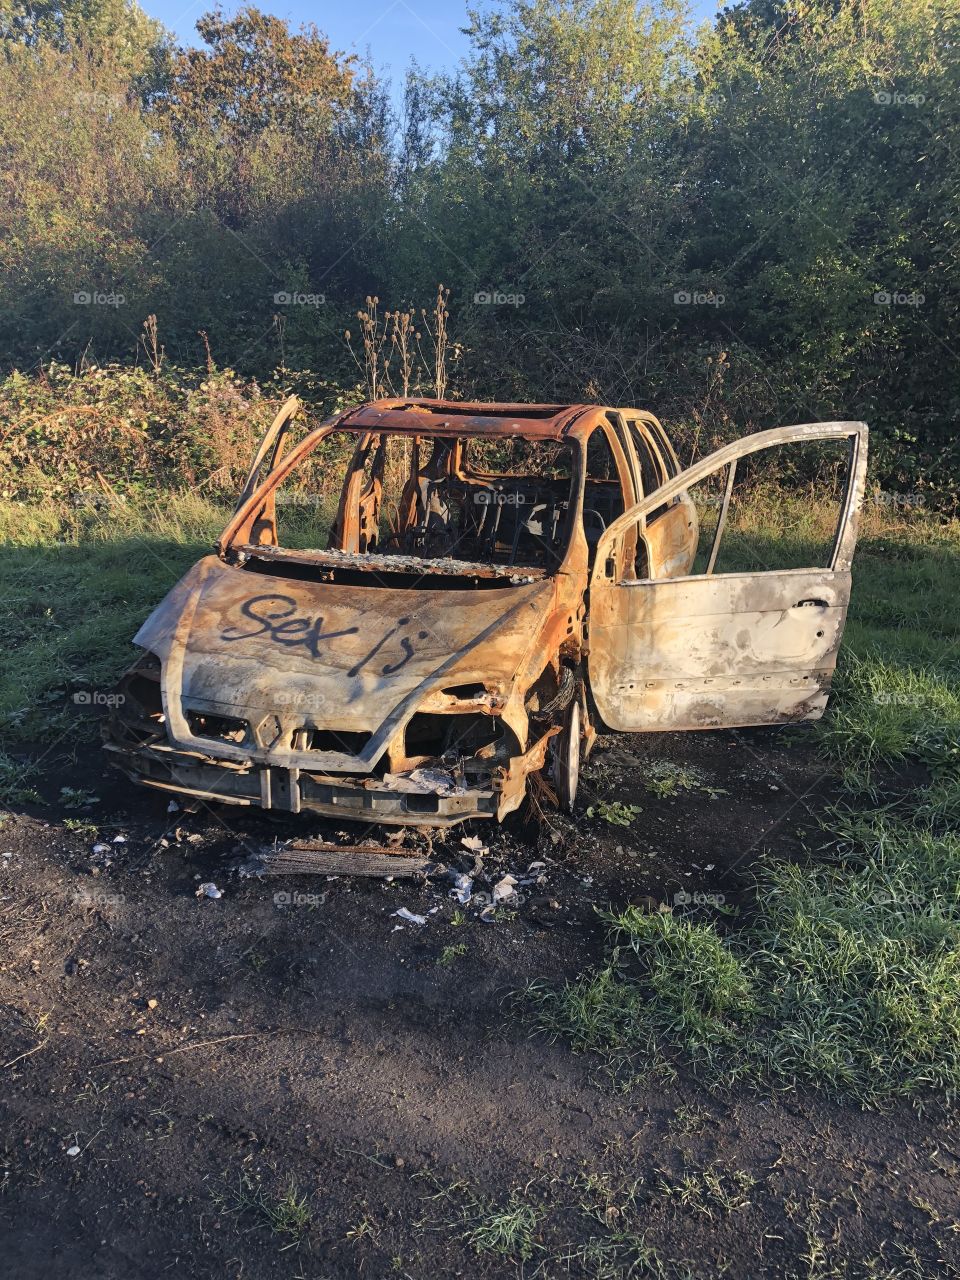 Another burnt out car